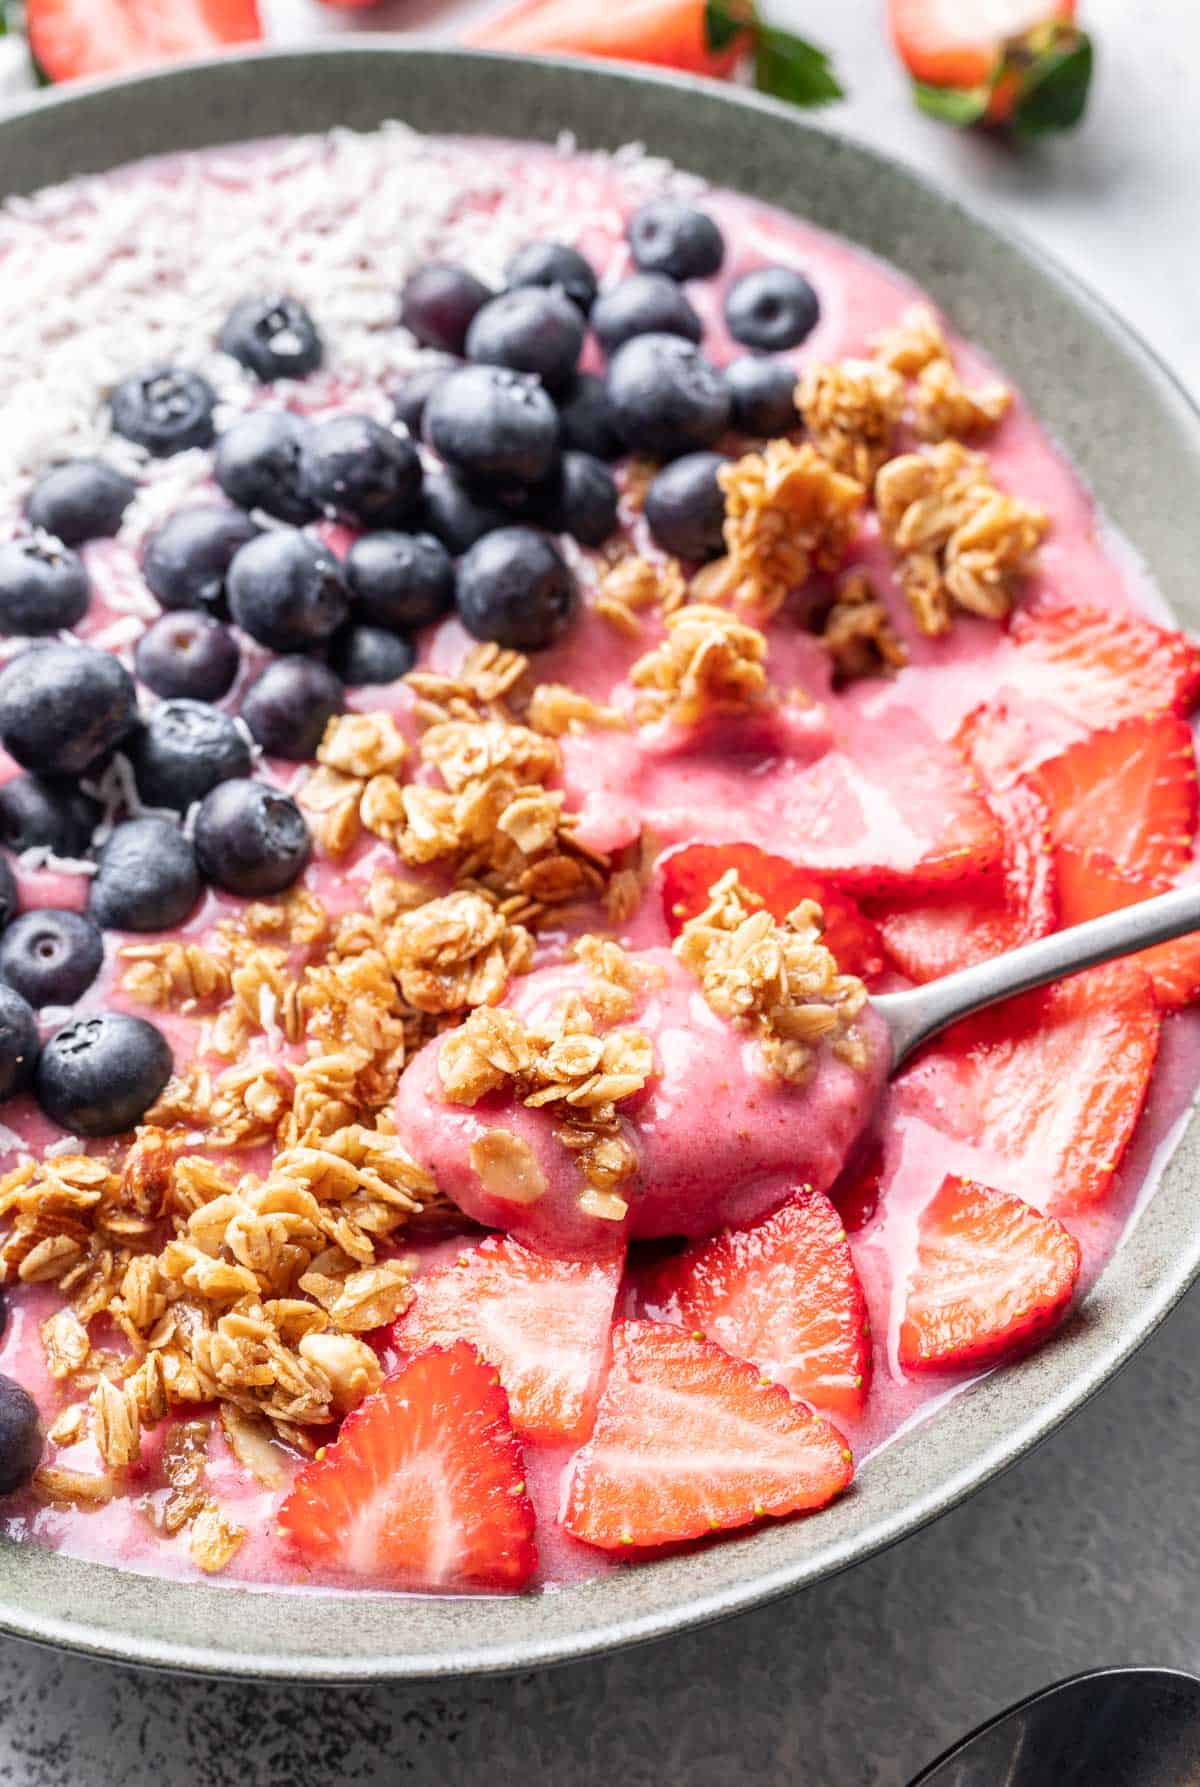 Strawberry smoothie bowl with a spoon scooping some out.